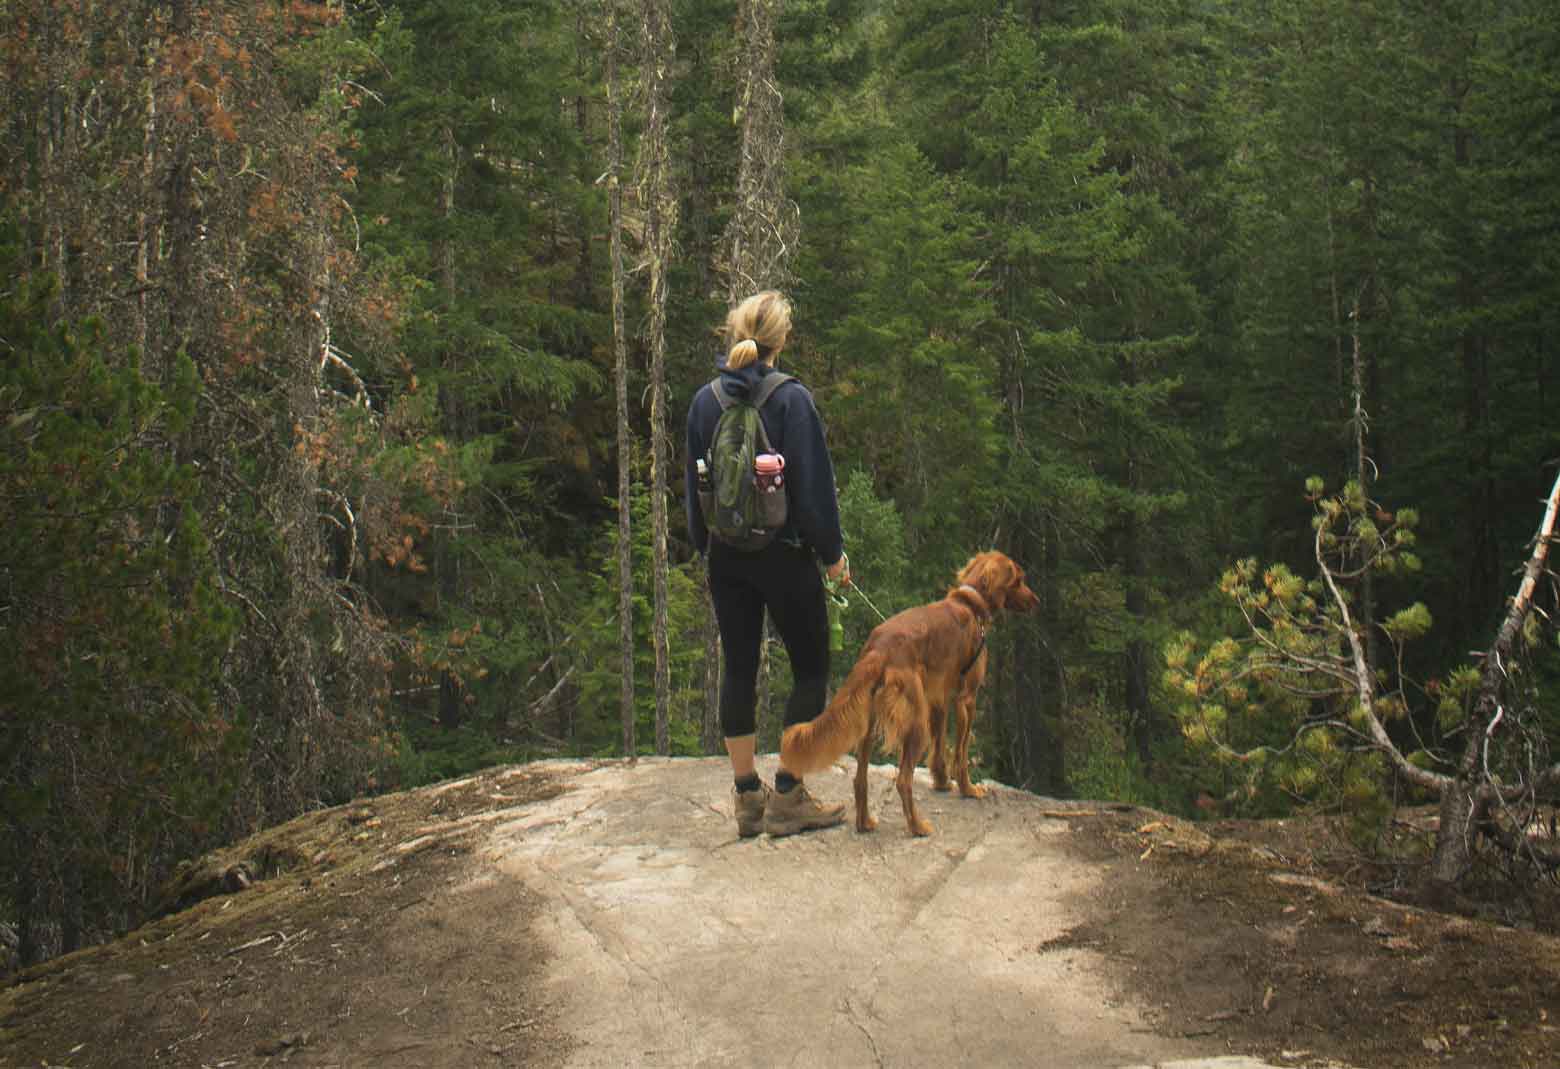 Women And dog Hiking In The Woods Looking Over A Cliff